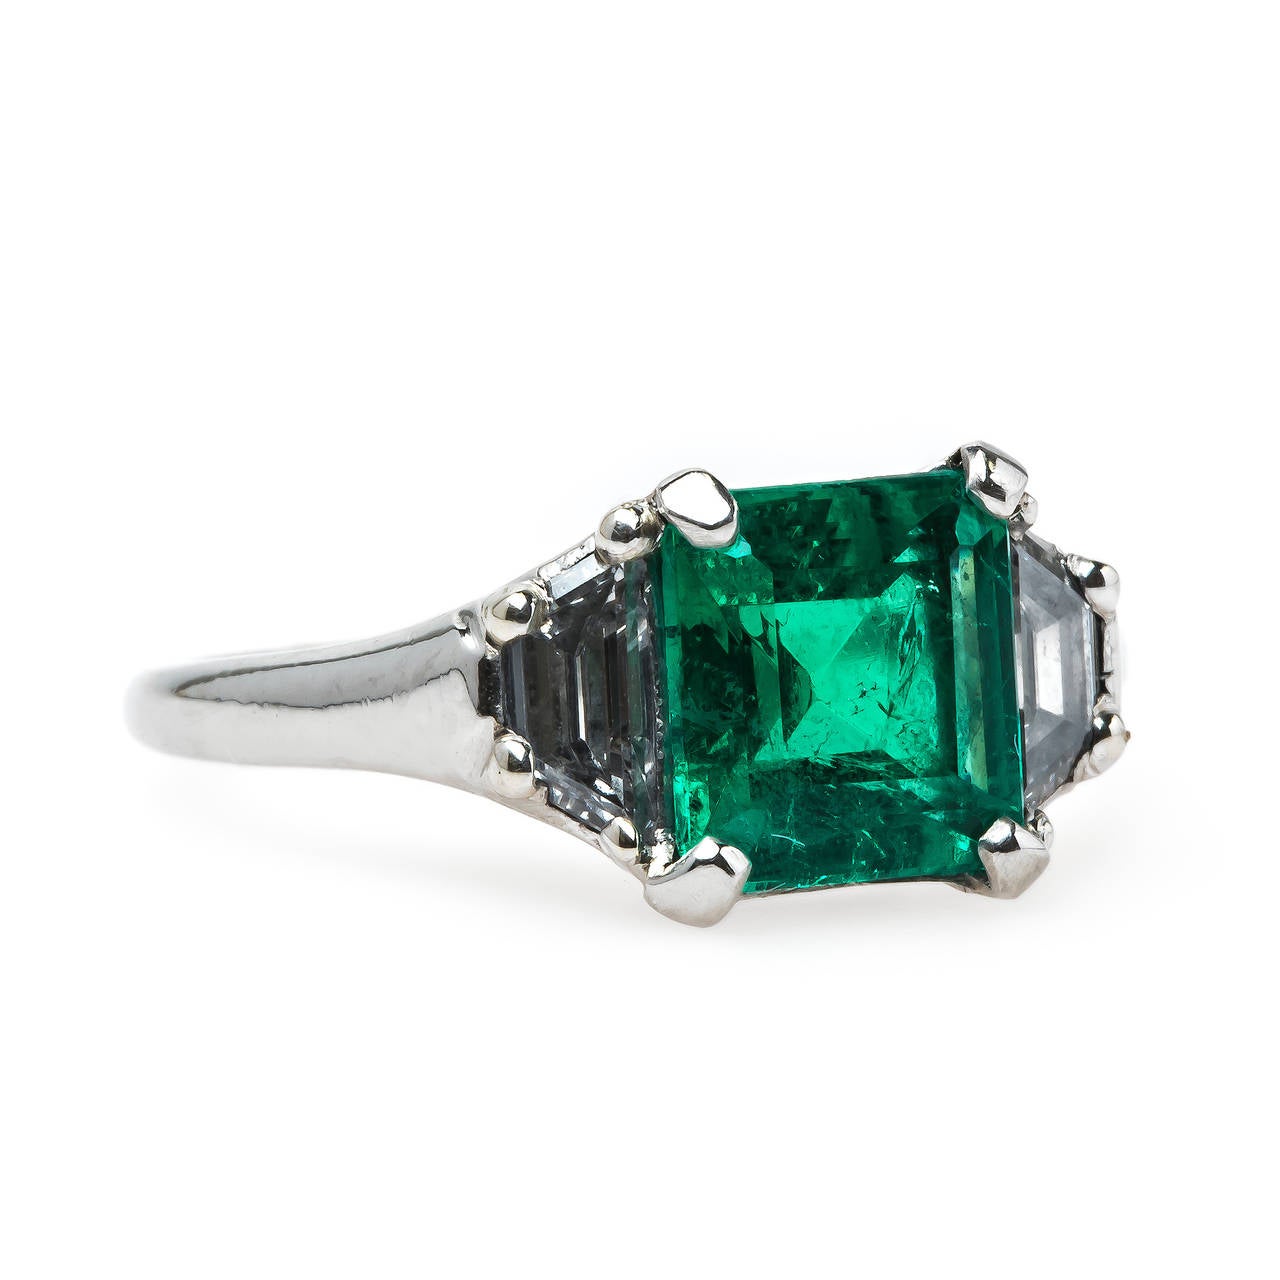 St. Charles is a chic, authentic Mid-Century (circa 1950) platinum-set emerald and diamond engagement ring featuring an extraordinary 1.35ct Step-Cut square emerald. This stunning emerald is accompanied by a Guild Laboratory certificate stating that